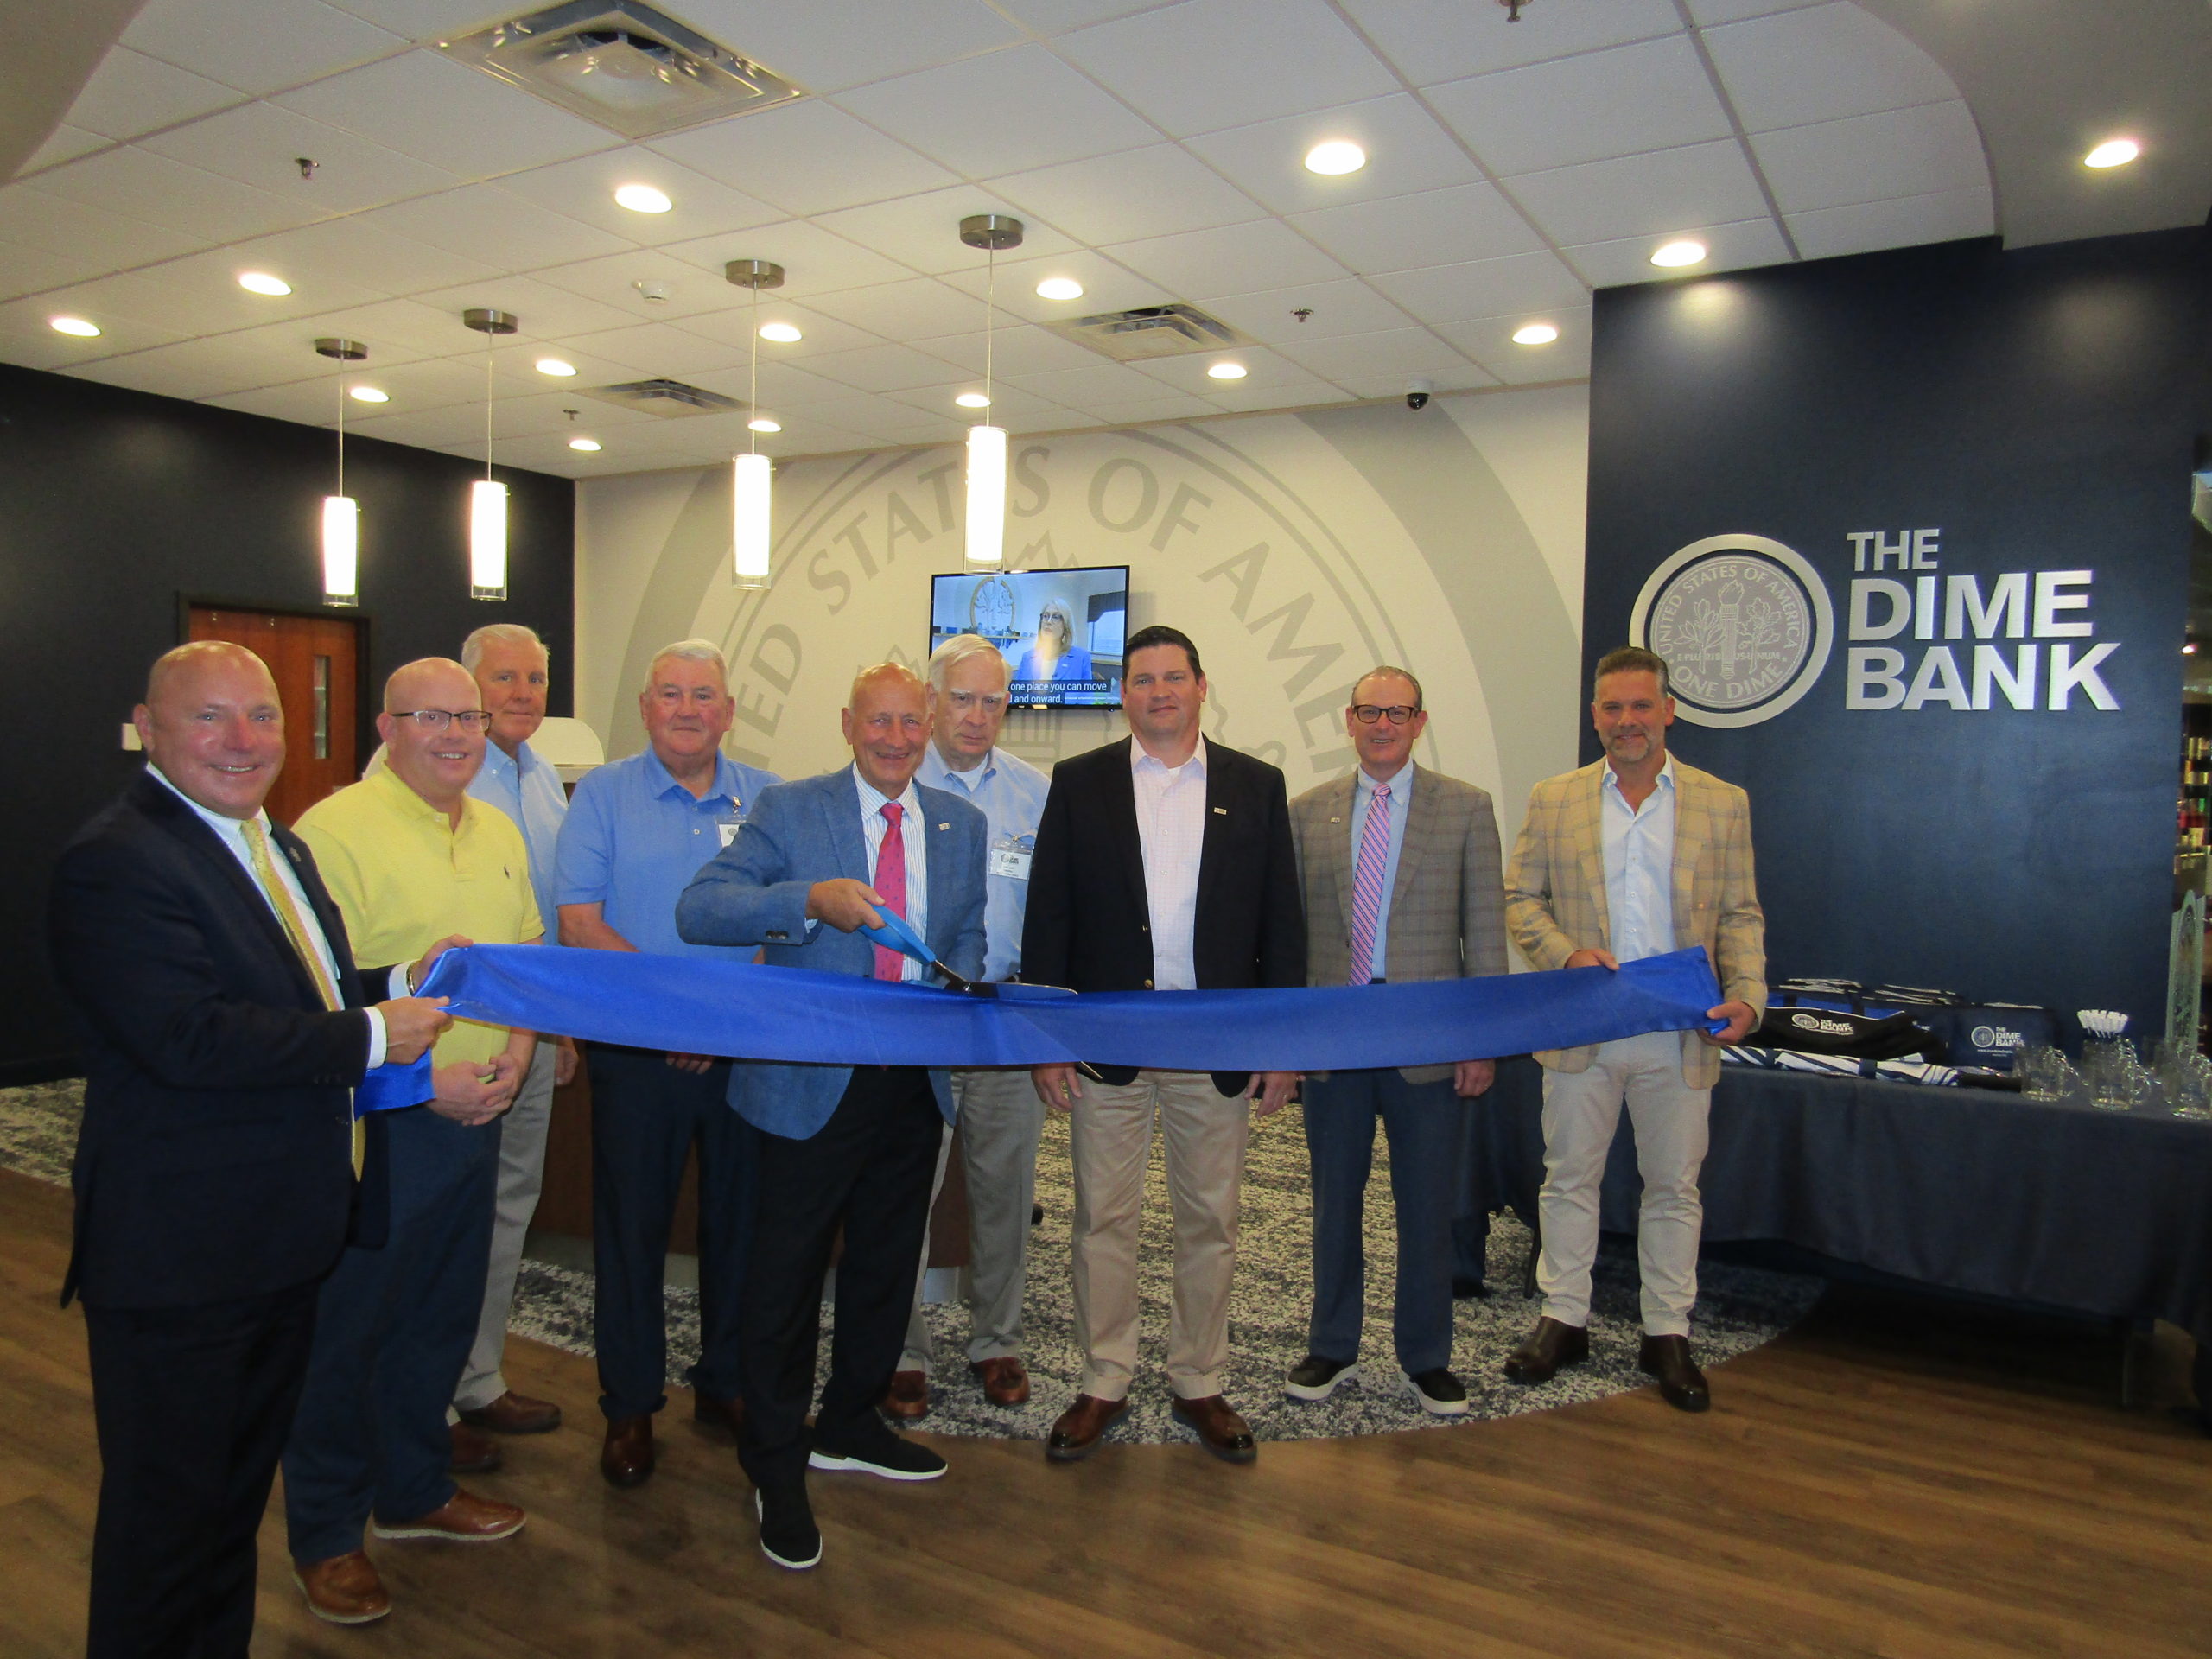 The Dime Bank Celebrates its Steamtown Community Branch in Scranton